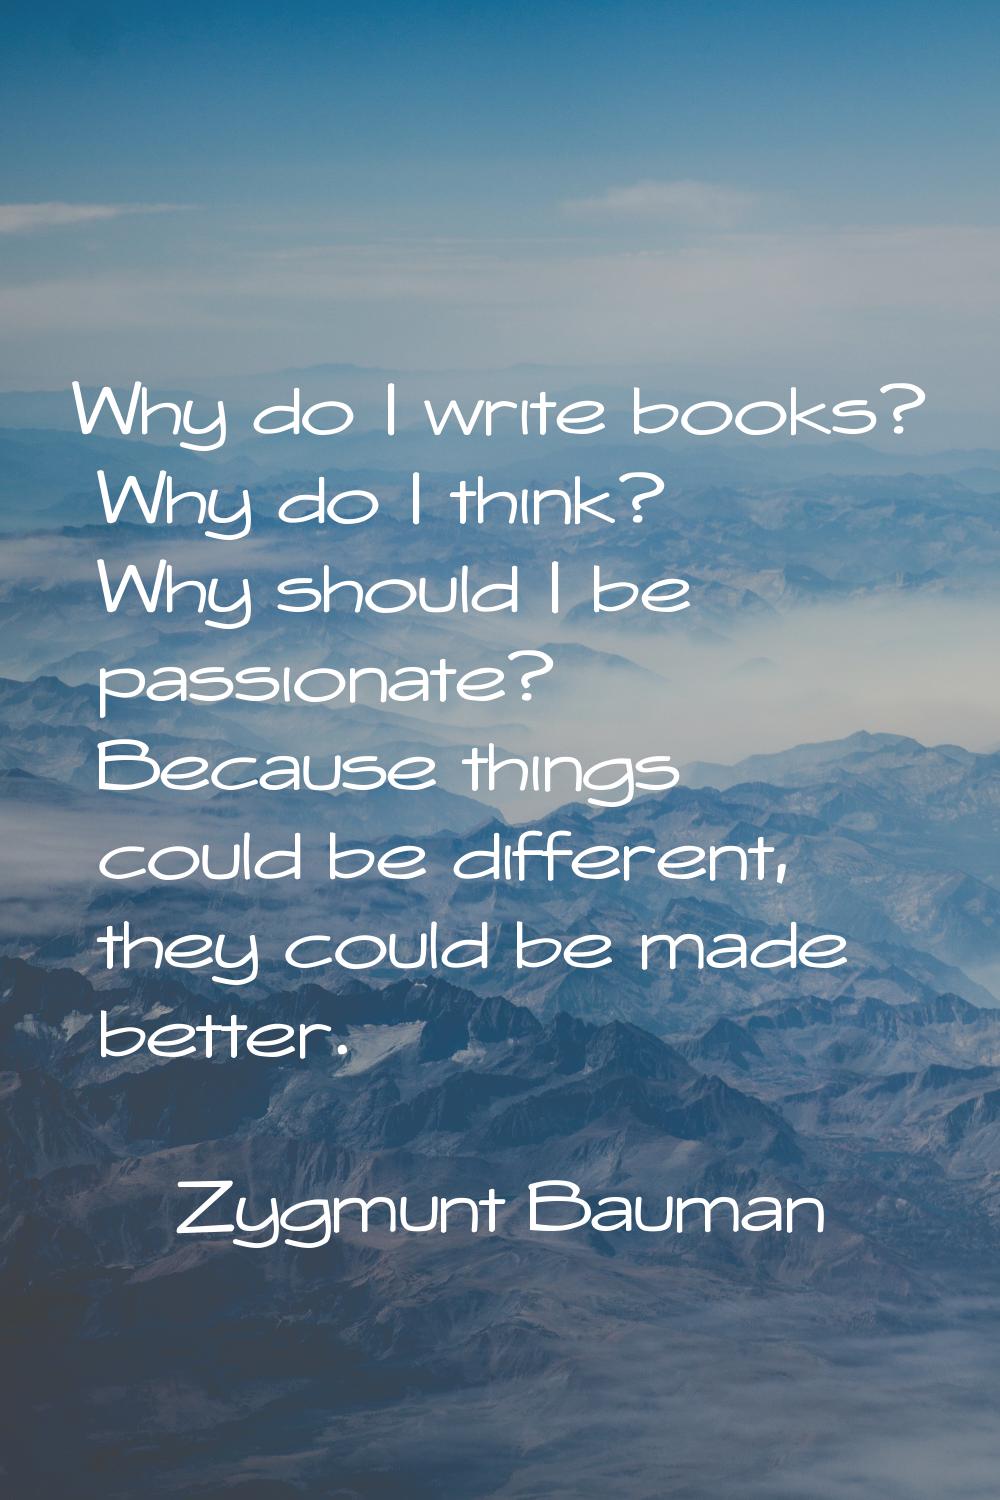 Why do I write books? Why do I think? Why should I be passionate? Because things could be different